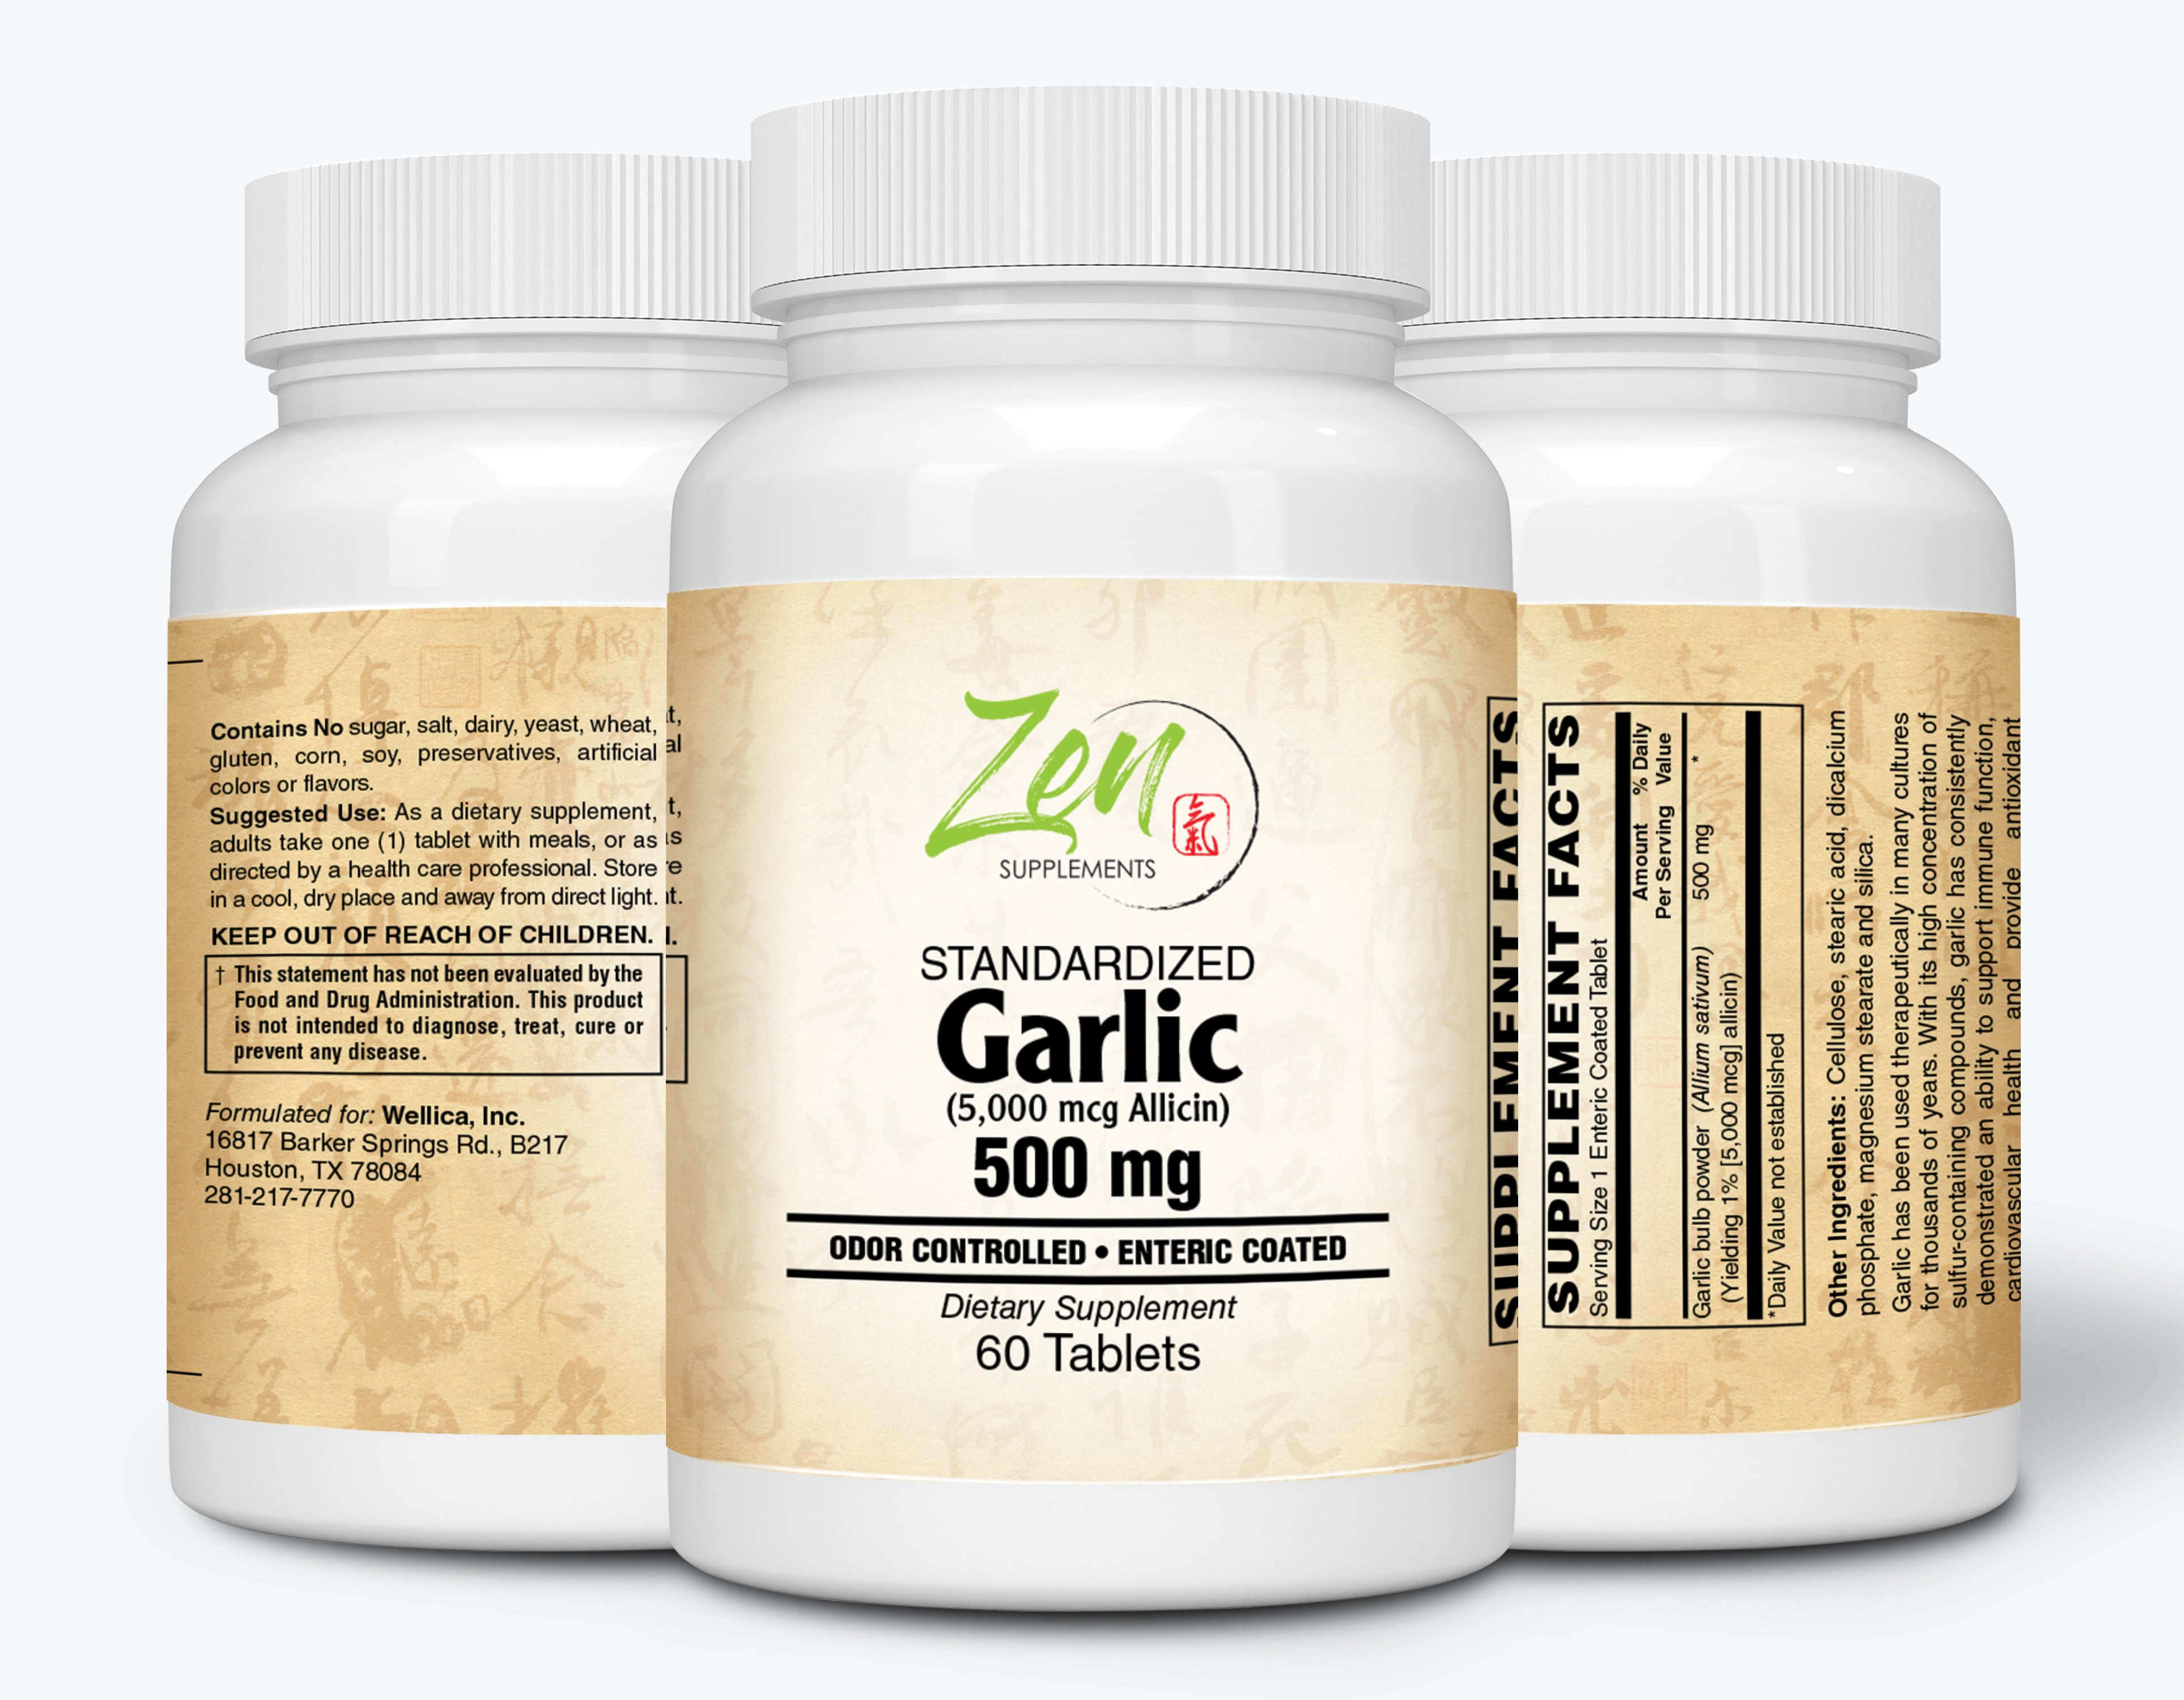 Zen Supplements - Garlic 500Mg Extract - Enteric Coated - Supports Cardiovascular Health, Promotes a Healthy Inflammatory Response, Healthy Blood Pressure & Cholesterol Levels 60-Tabs